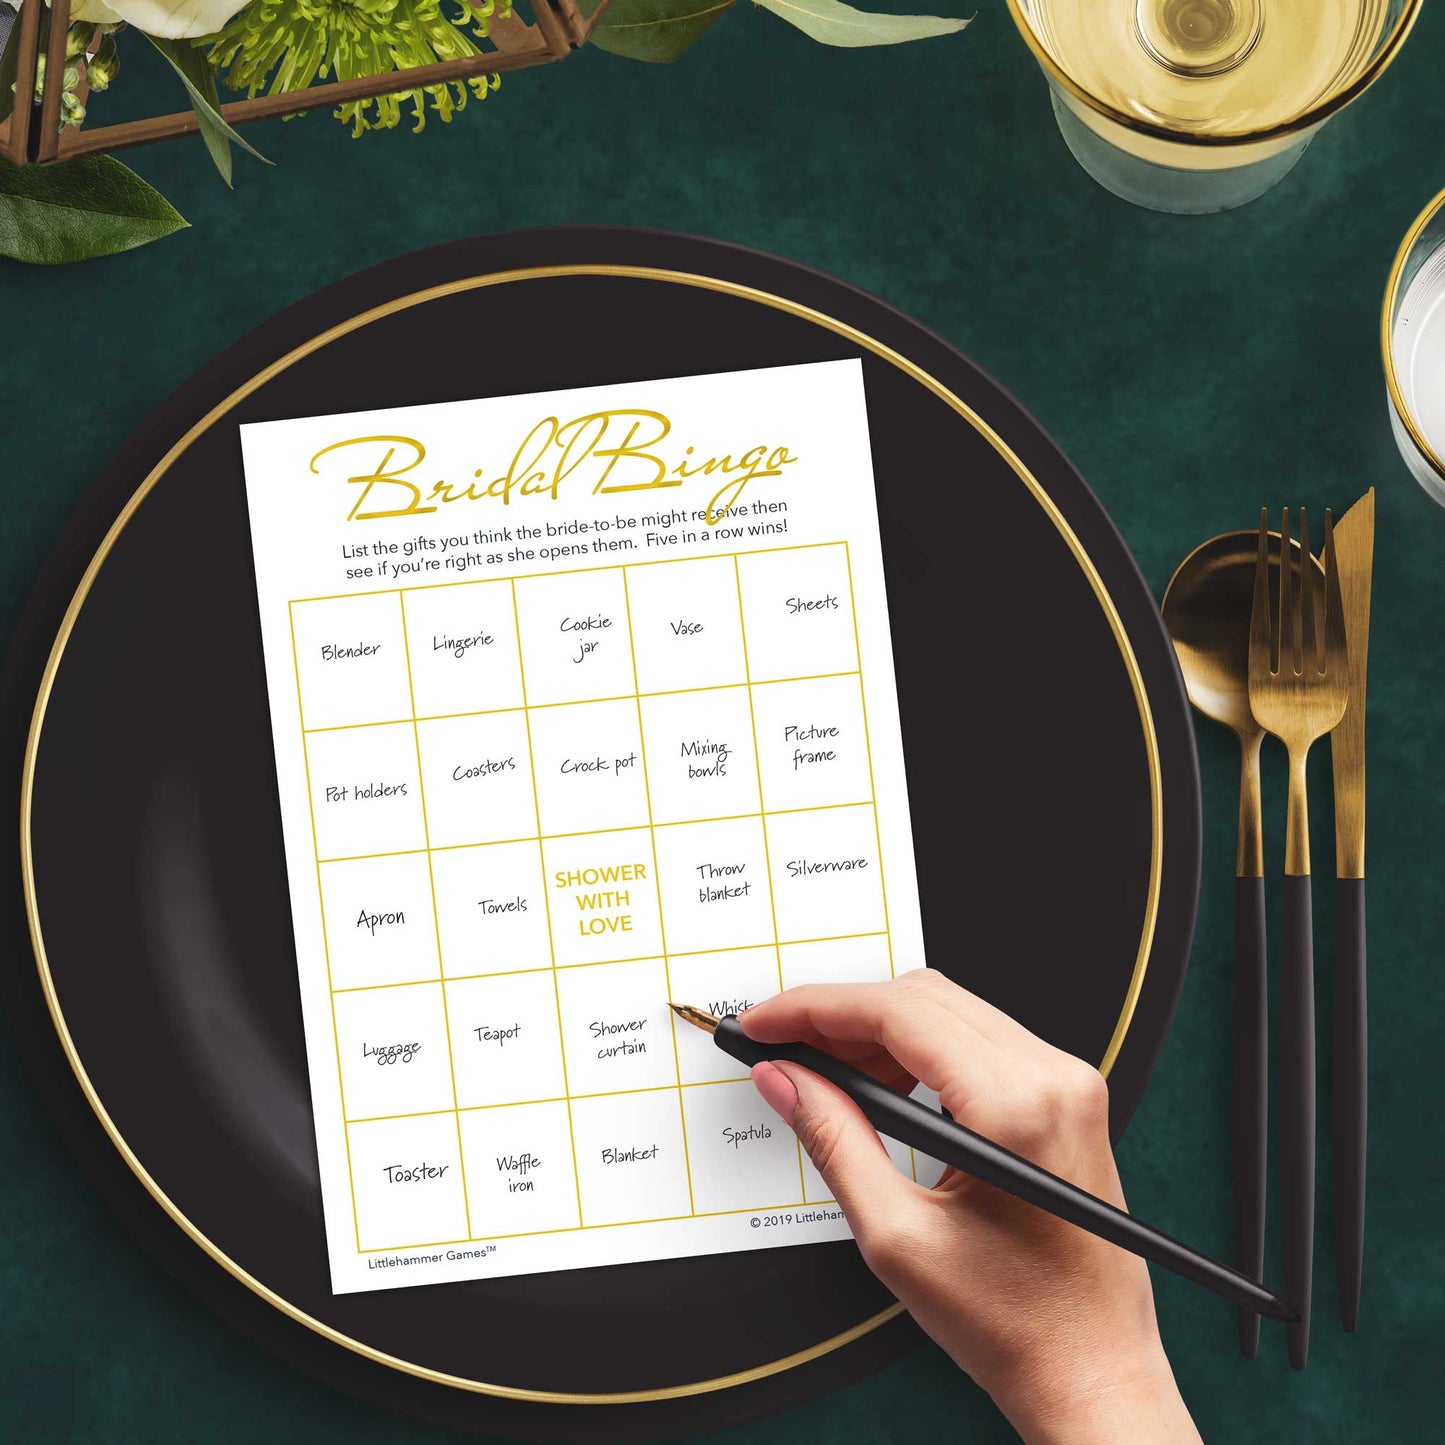 Woman with a pen sitting at a dark place setting with a black and gold plate filling out a gold and white Bridal Gift Bingo card